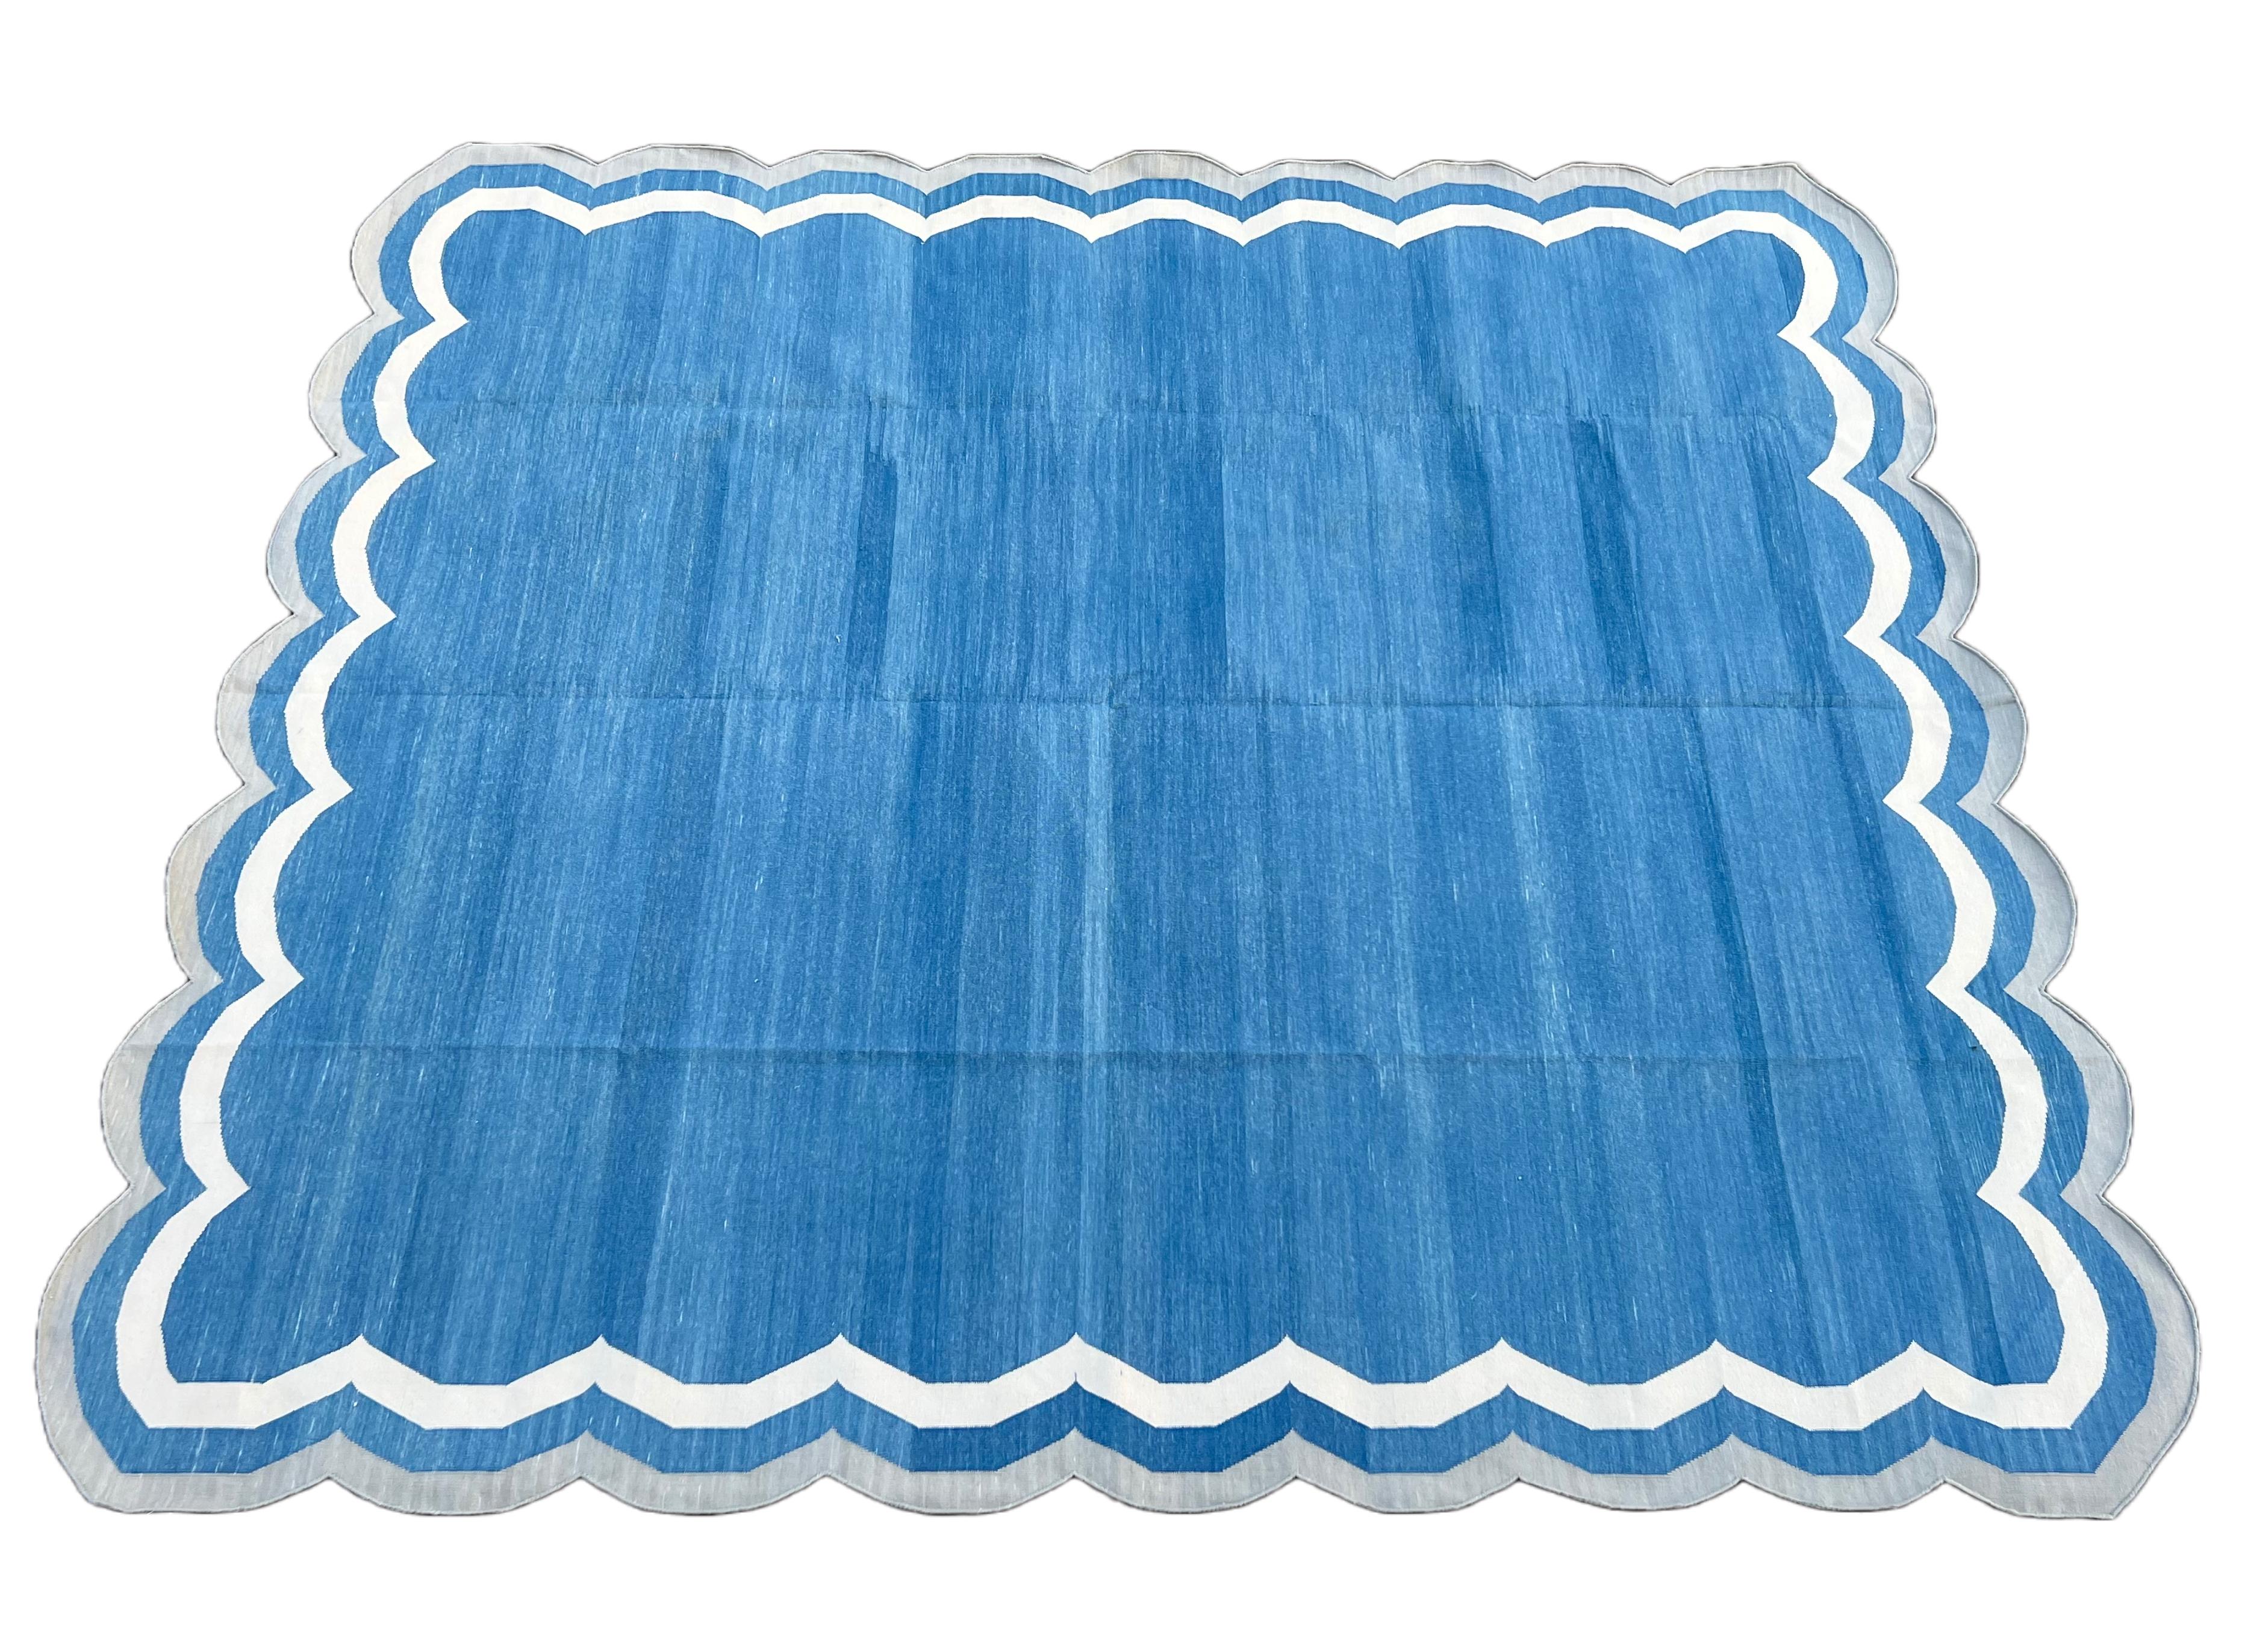 Handmade Cotton Area Flat Weave Rug, 8x10 Blue And Grey Scalloped Stripe Dhurrie For Sale 4